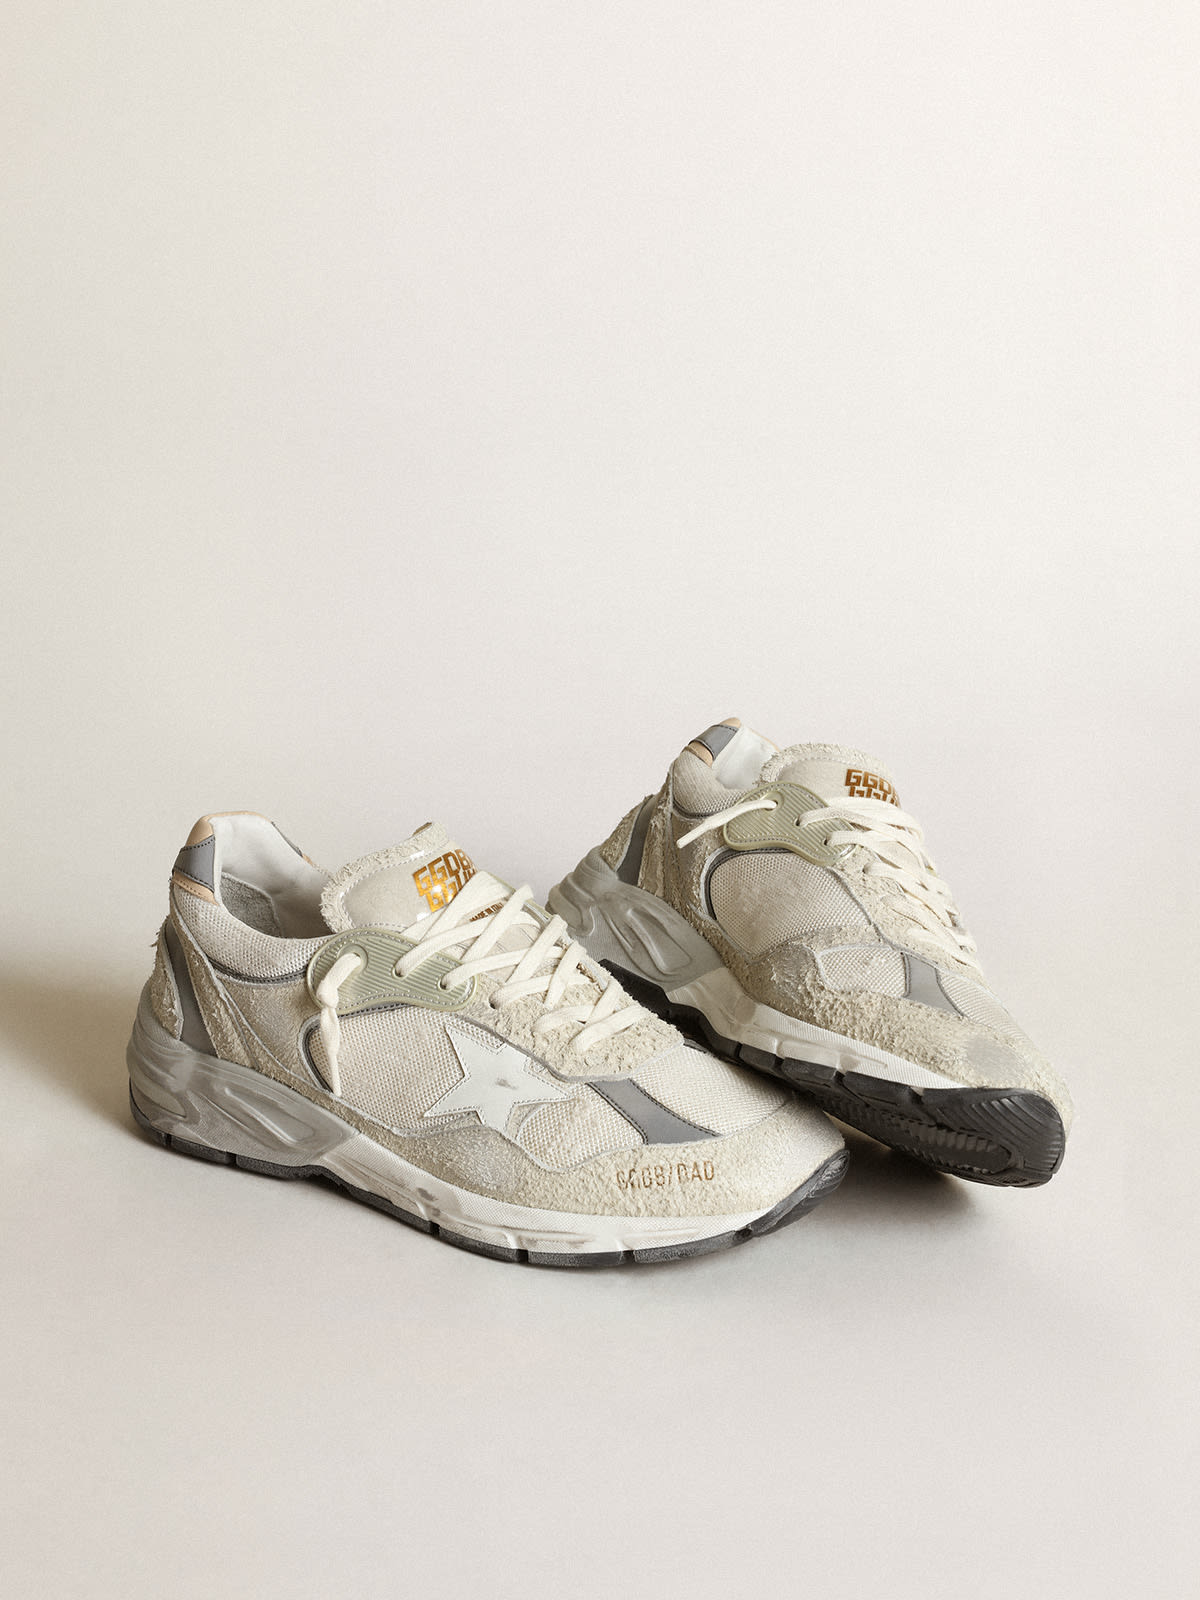 Golden Goose - Dad-Star sneakers in white mesh and suede with white leather star and beige leather heel tab in 